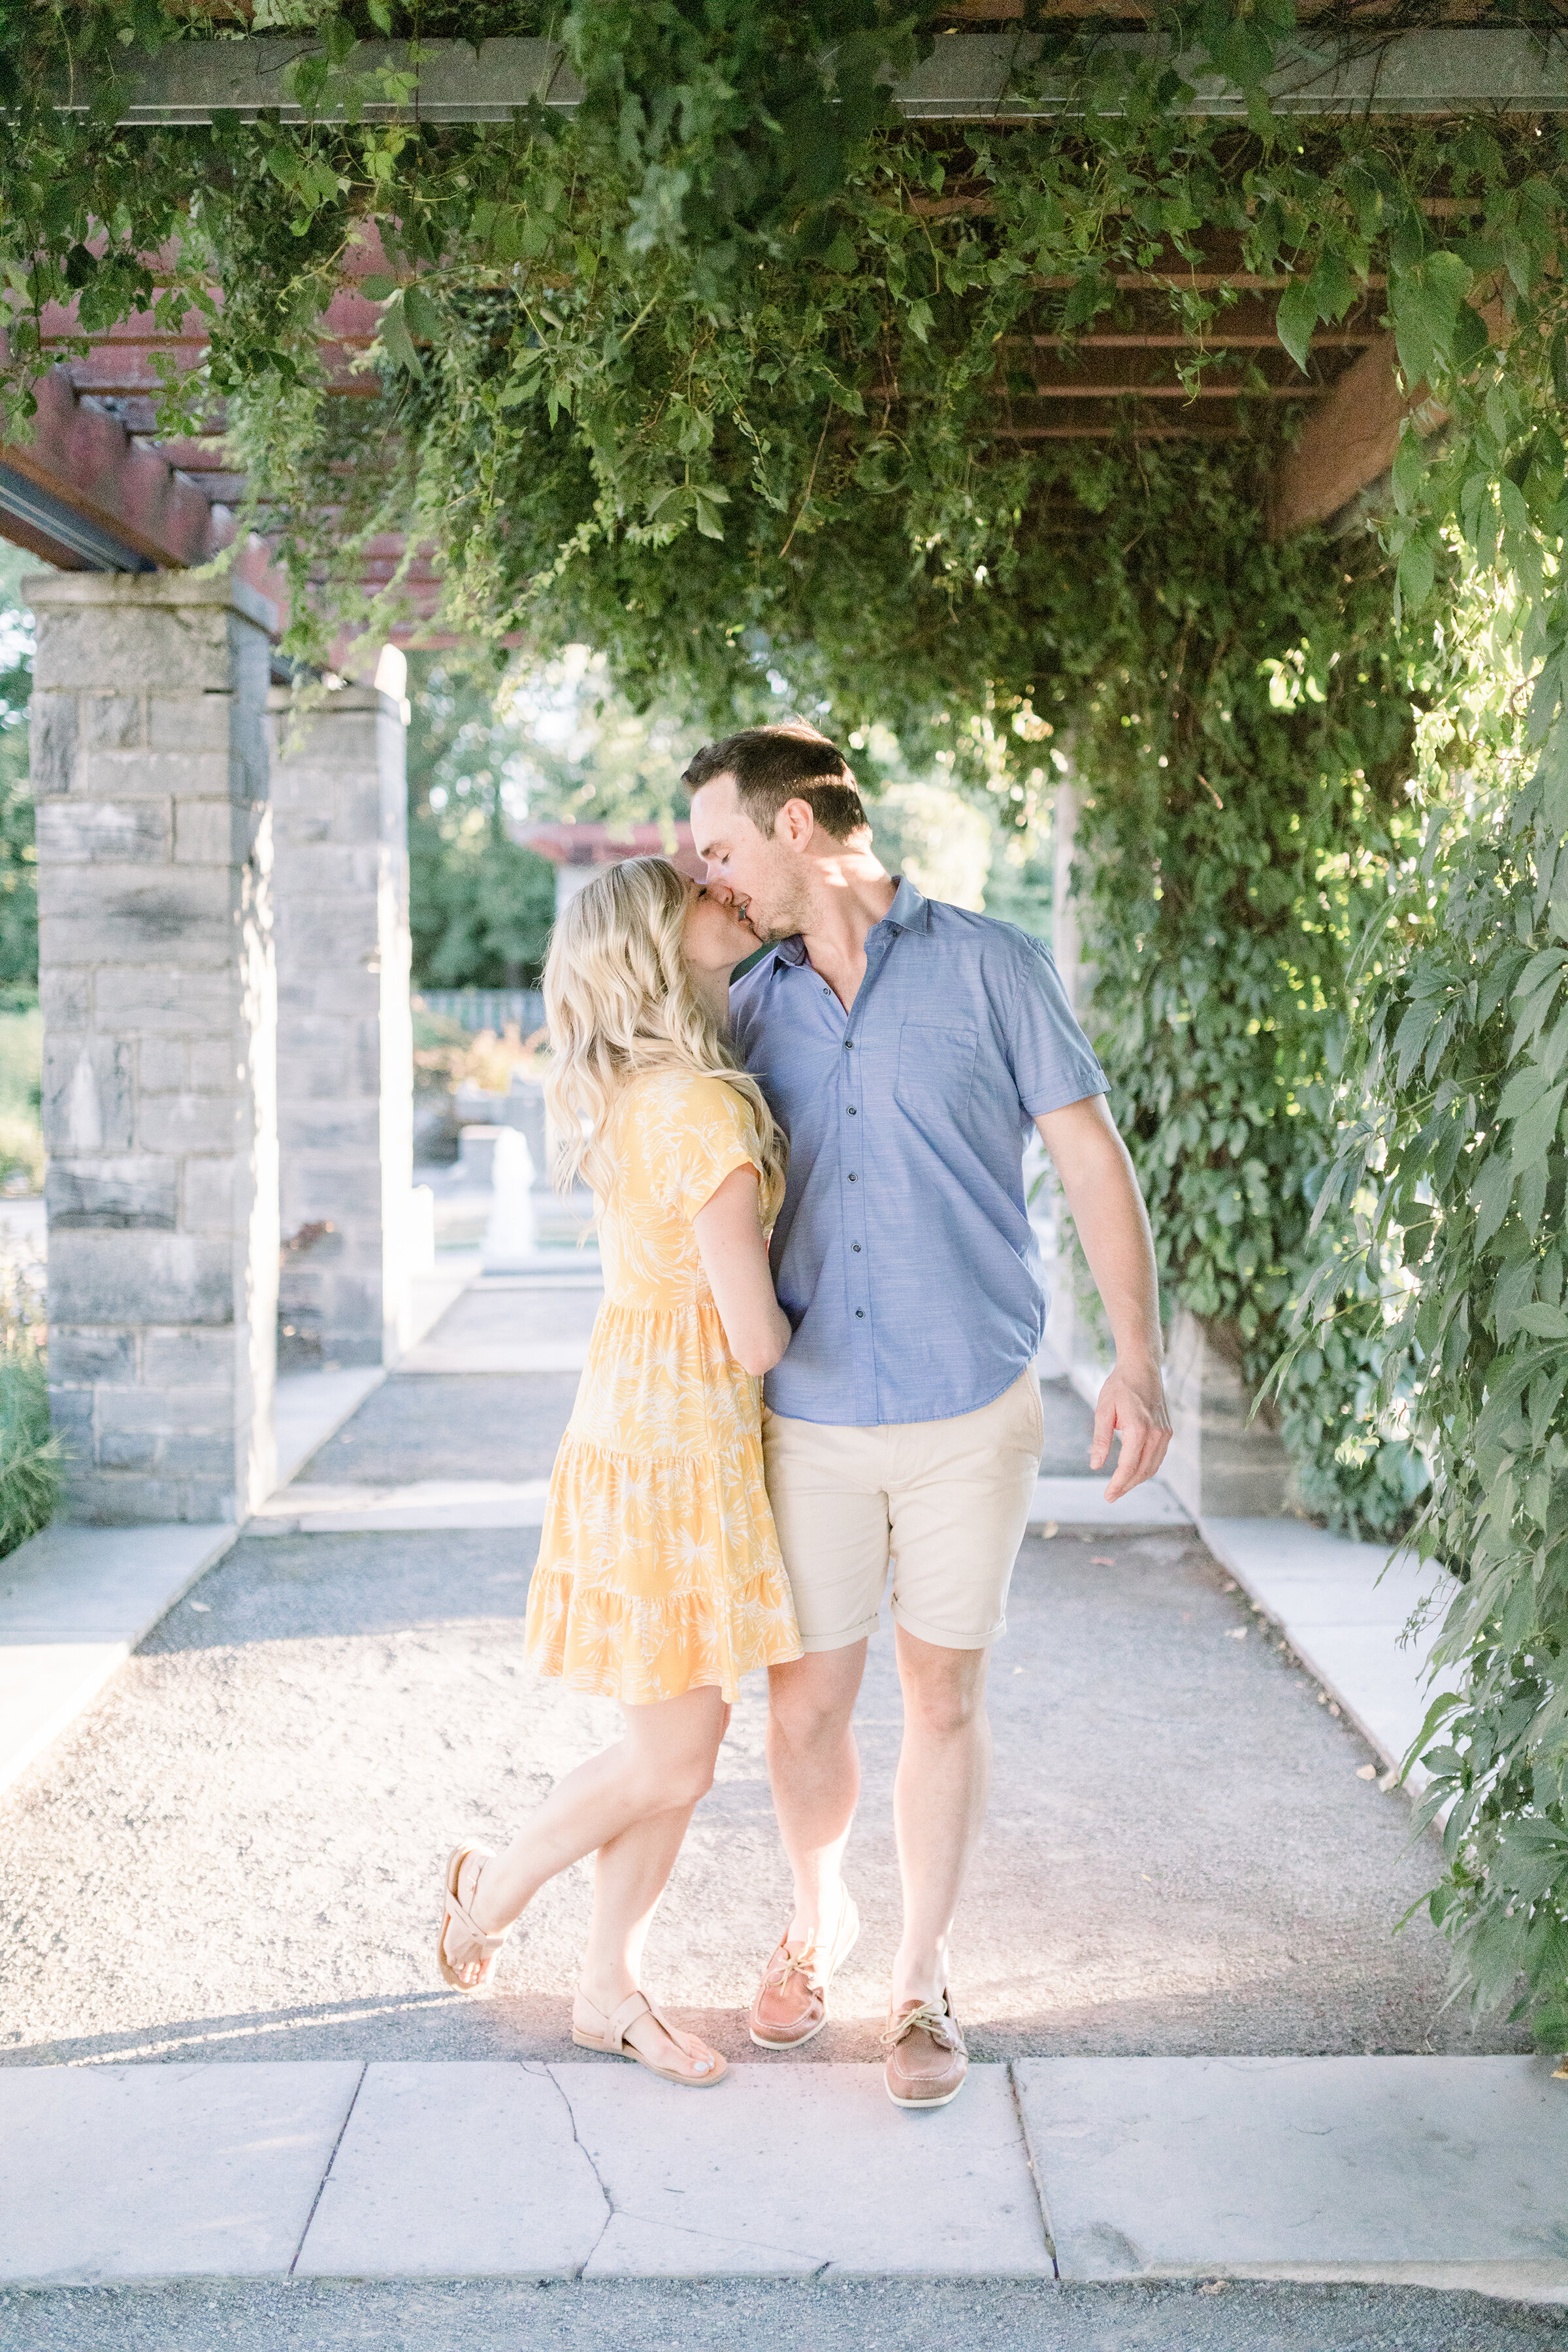  A couple share a kiss in the Botanical Gardens of Montreal Canada. Engagement session location inspiration professional engagement photographer outdoor photo shoot inspiration ideas and goals couple goals couple pose inspiration ideas and goals spri